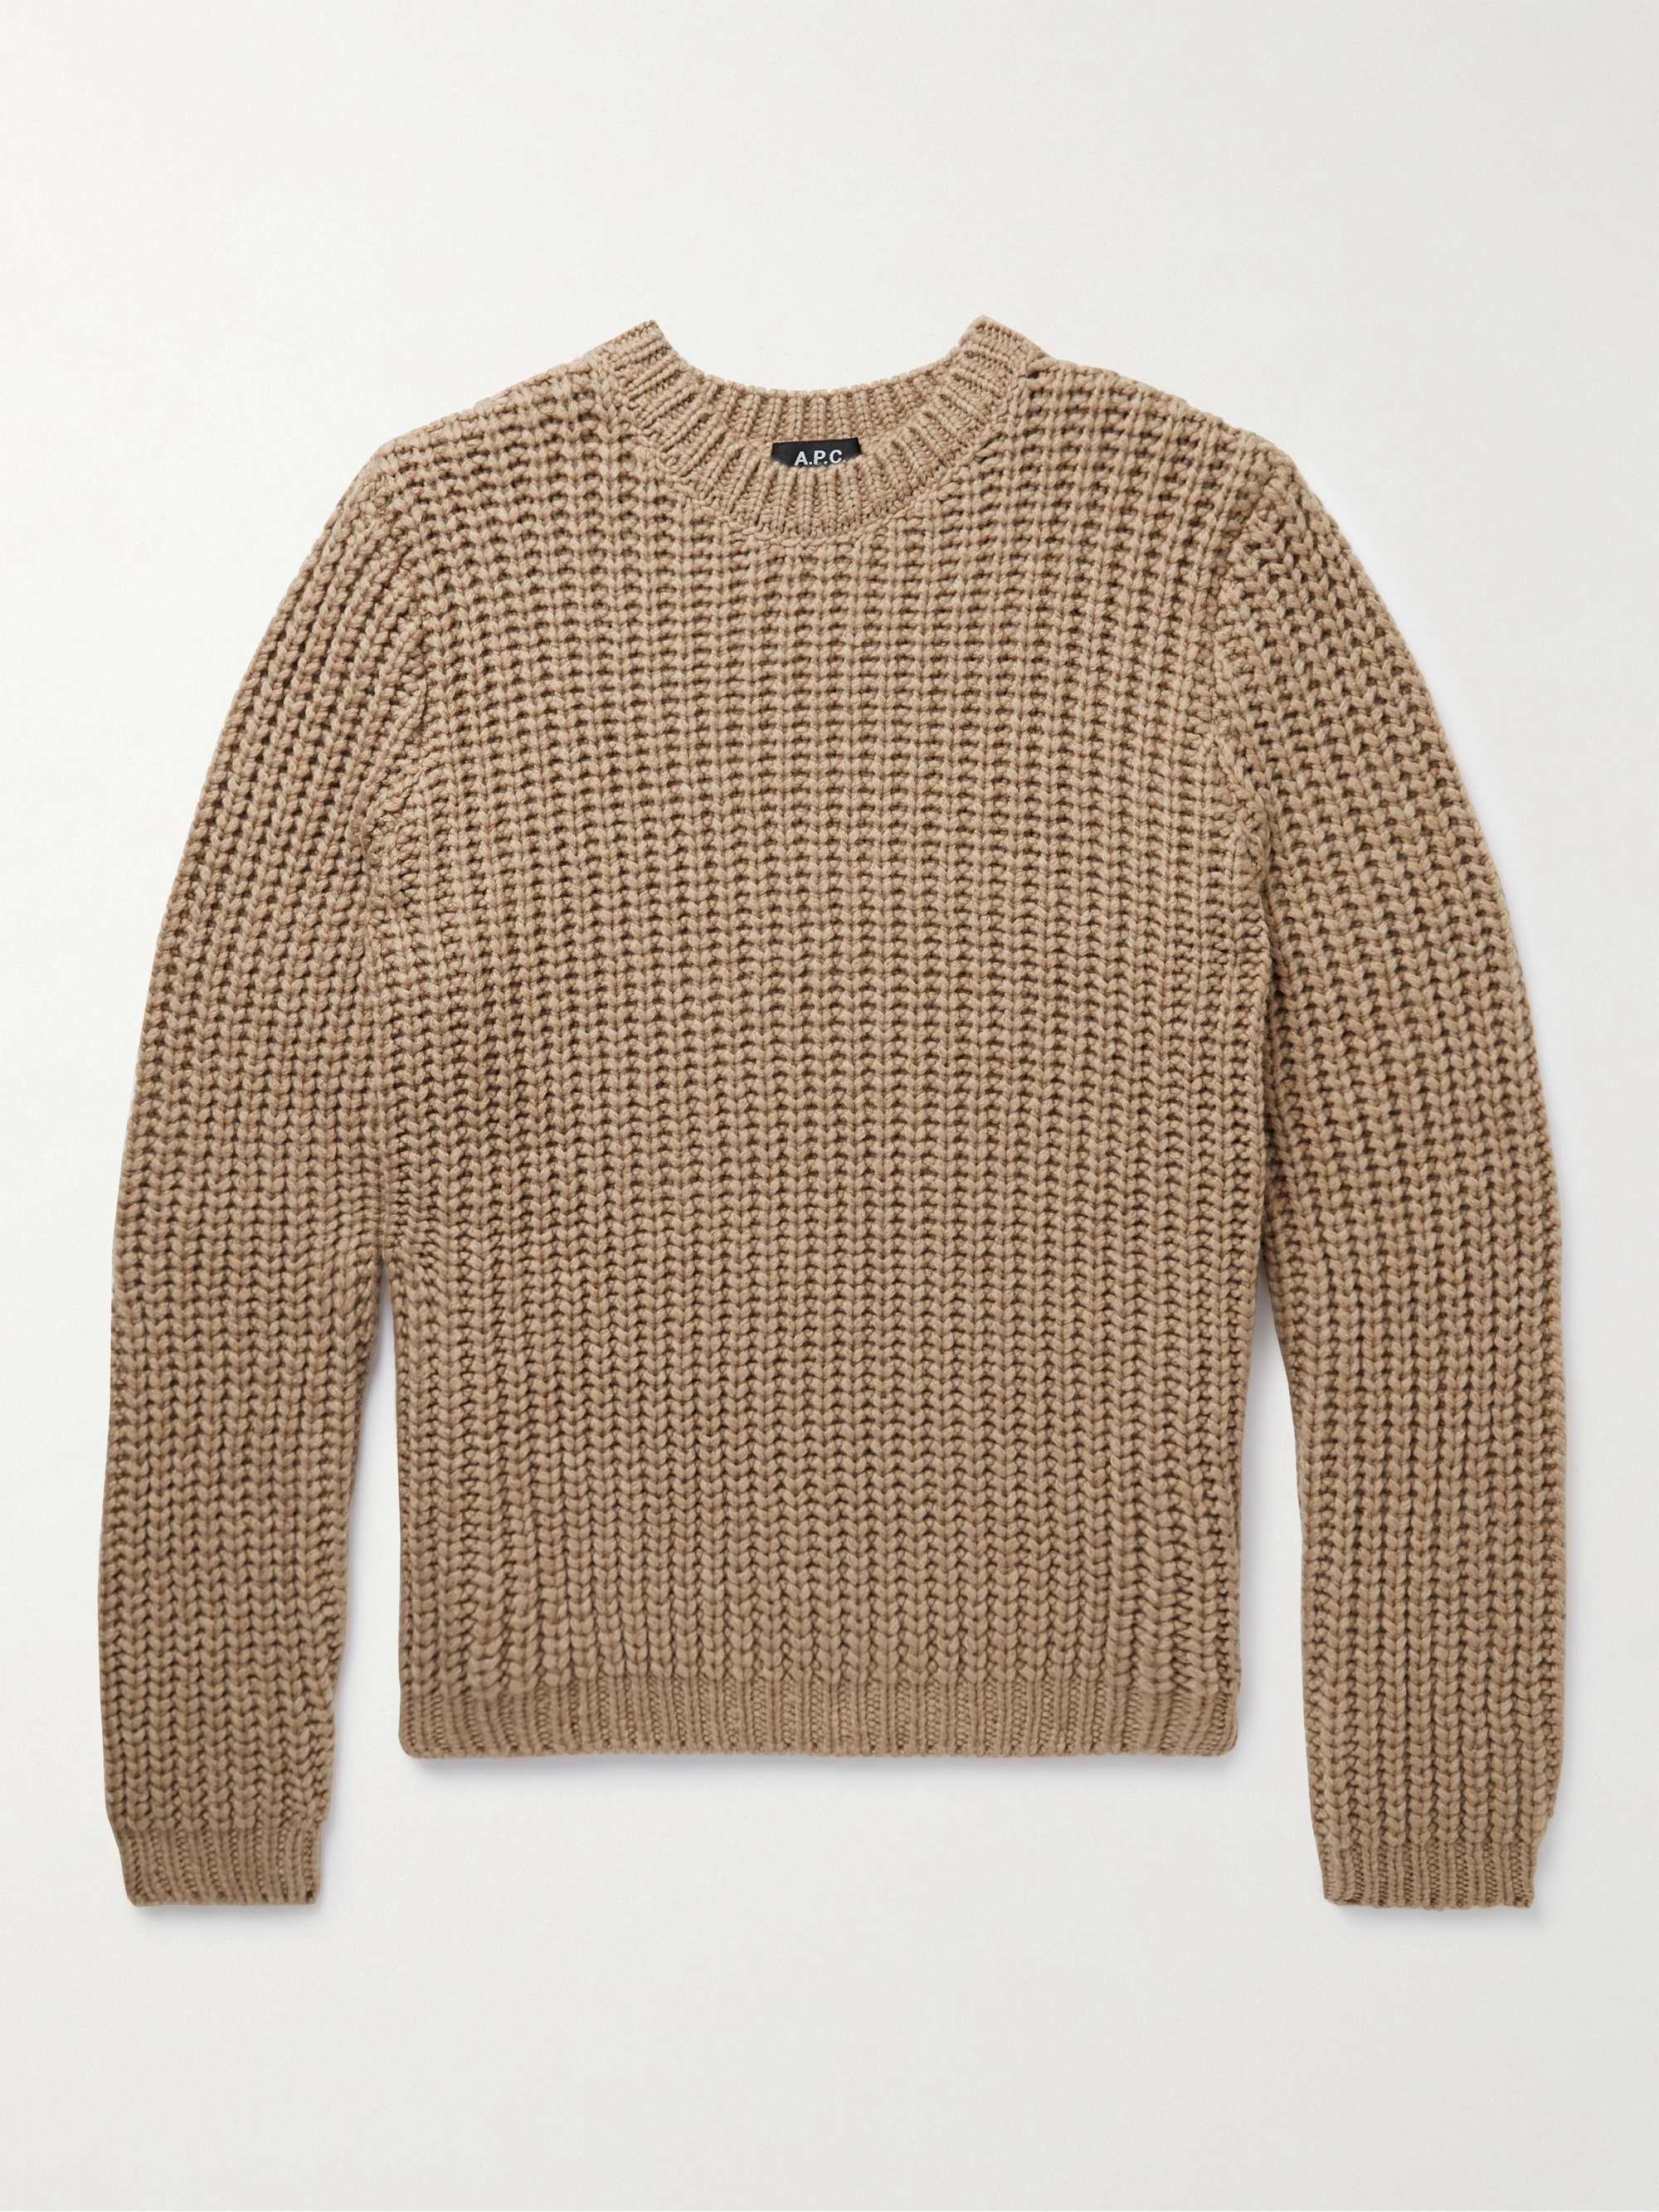 A.P.C. Heini Ribbed Wool-Blend Sweater for Men | MR PORTER